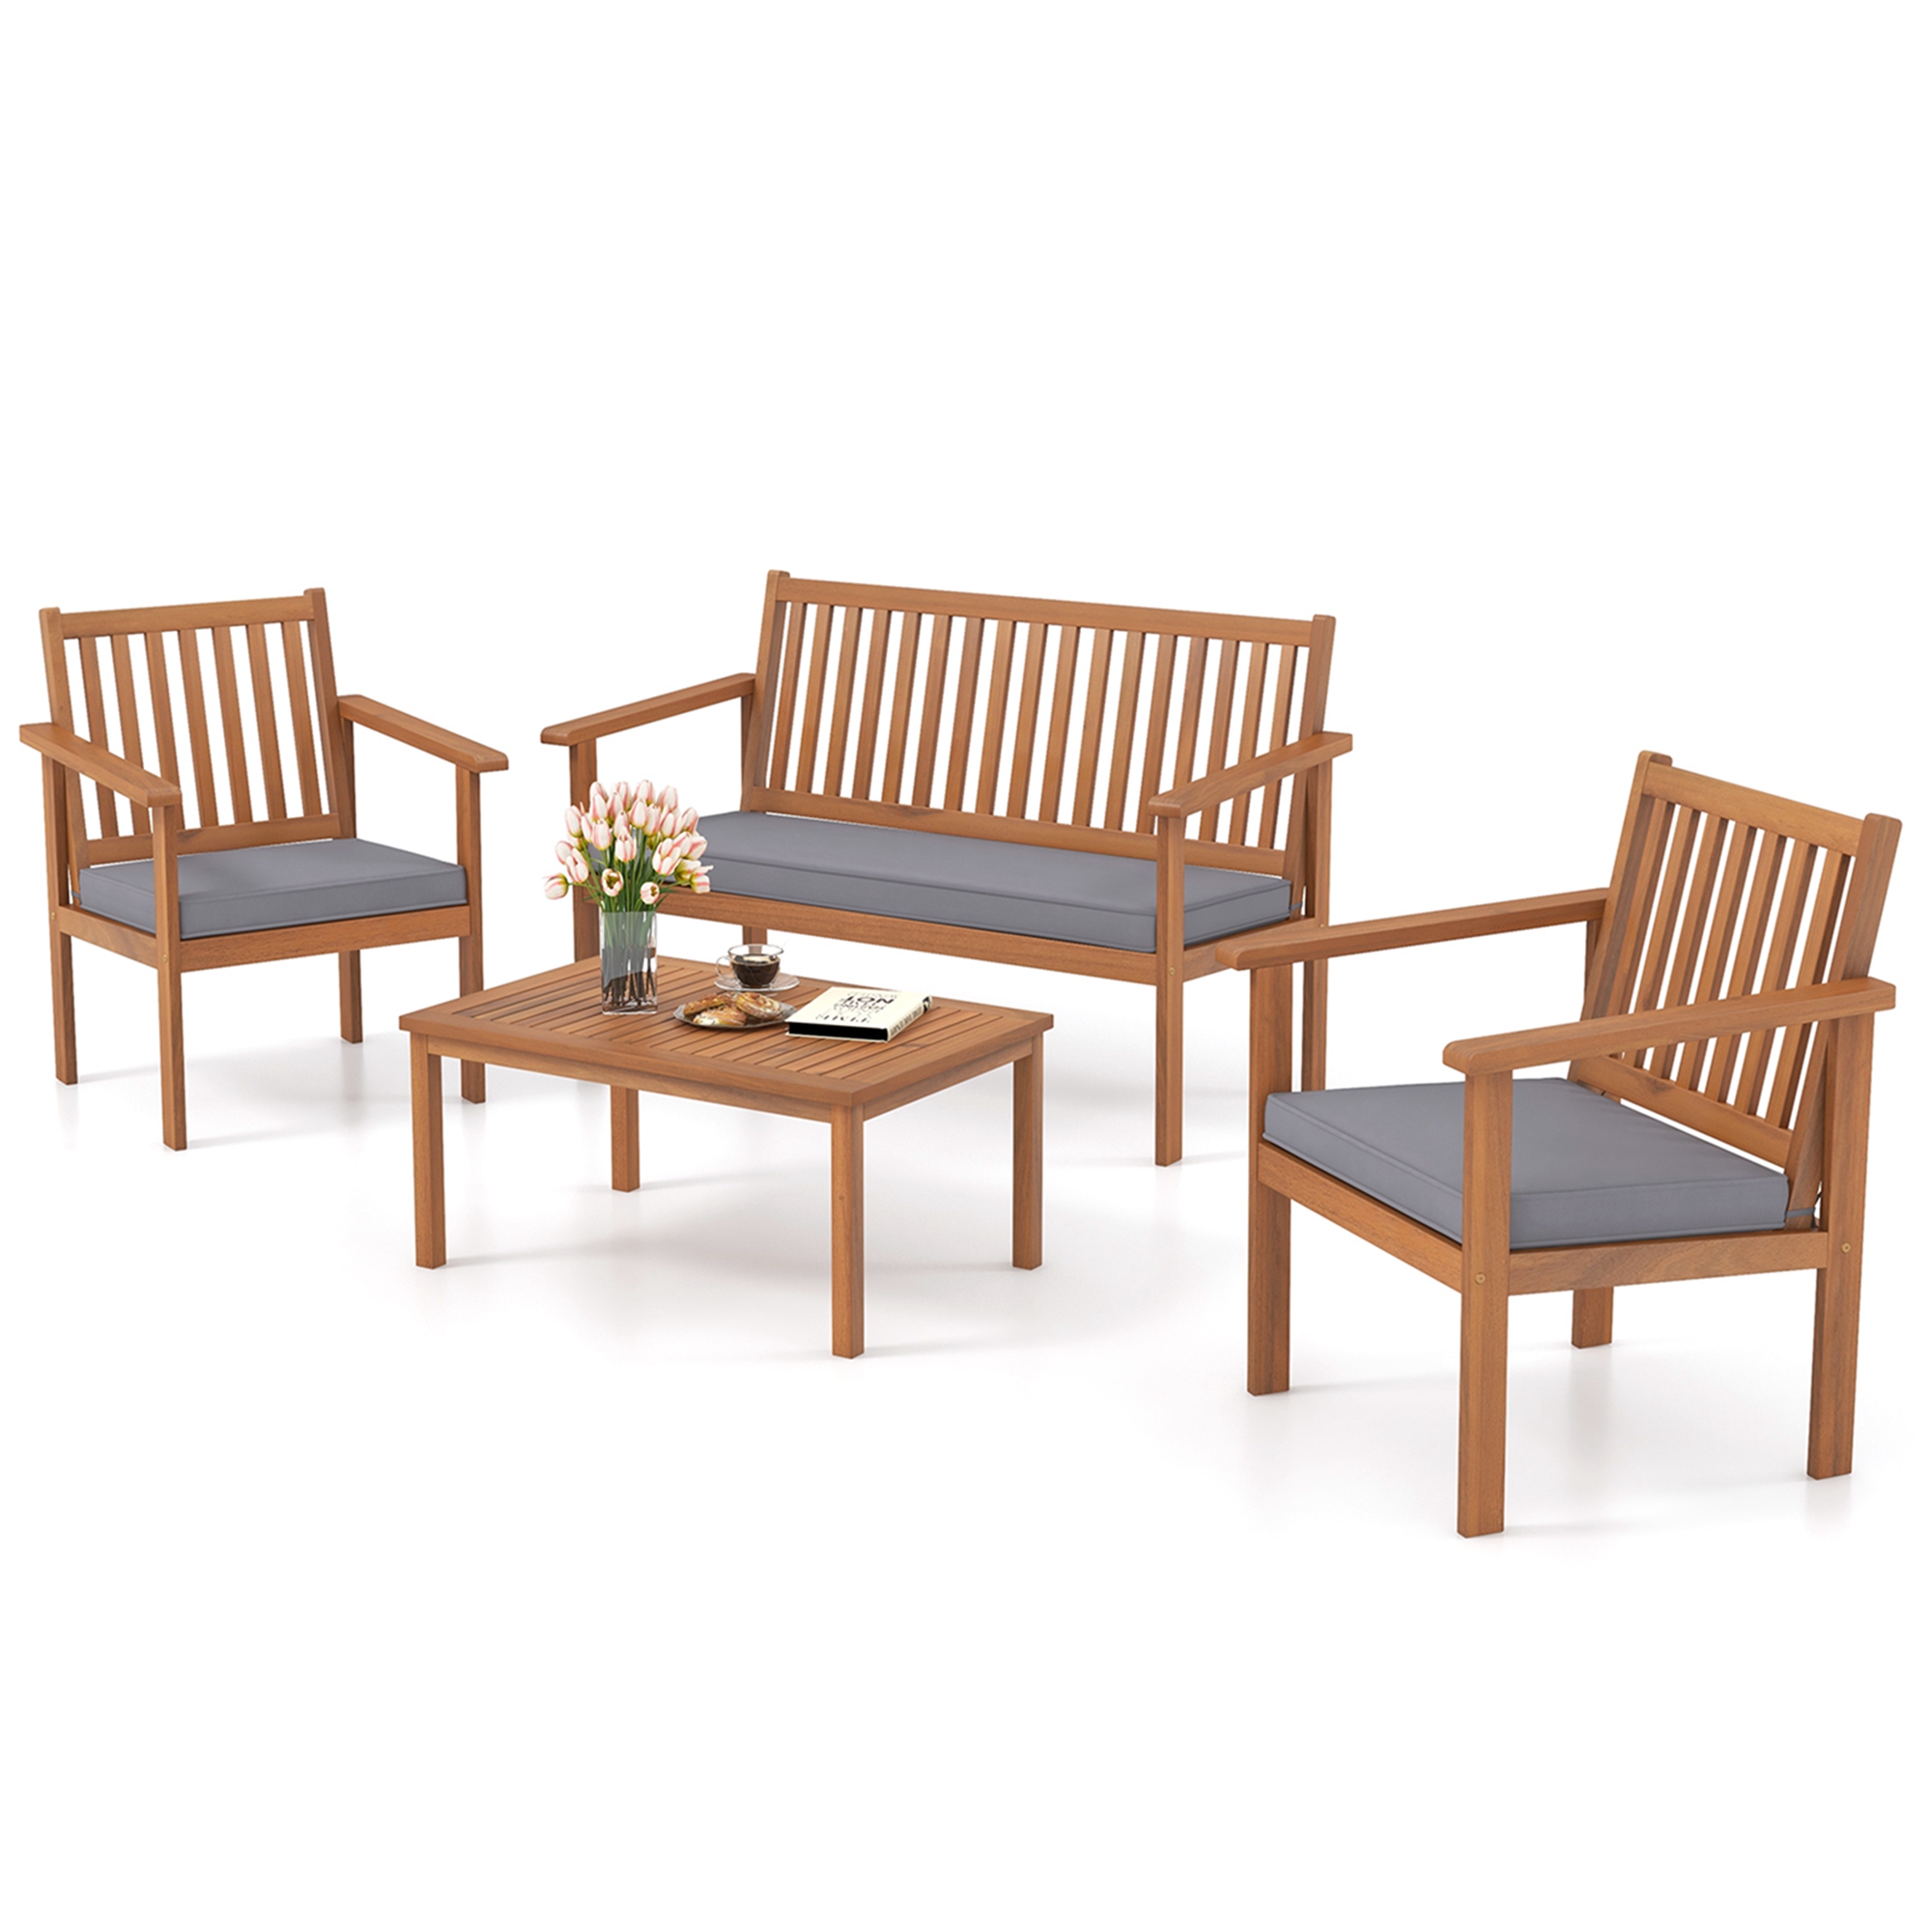 Costway 4 PCS Patio Wood Furniture Set with Loveseat, 2 Chairs & Coffee Table for Porch Grey - image 2 of 10